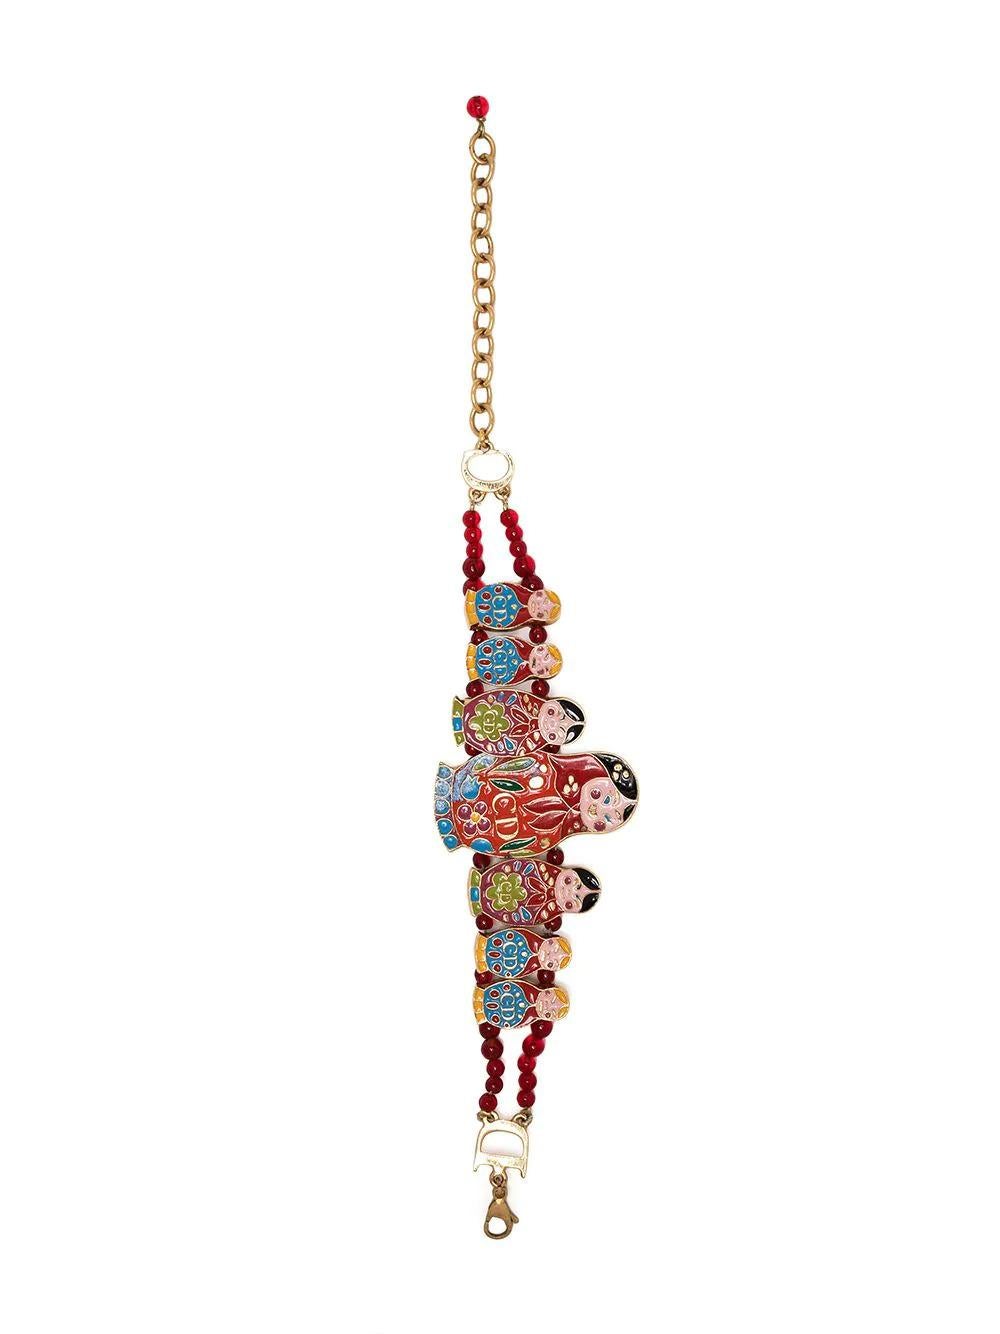 Featuring seven polychrome Russian dolls marked with CD resting on a double chain embellished with grey and red beads, this pre-owned vintage 1990's Dior by John Galliano bracelet has been inspired by Russian Matryoshka dolls. At the end of the